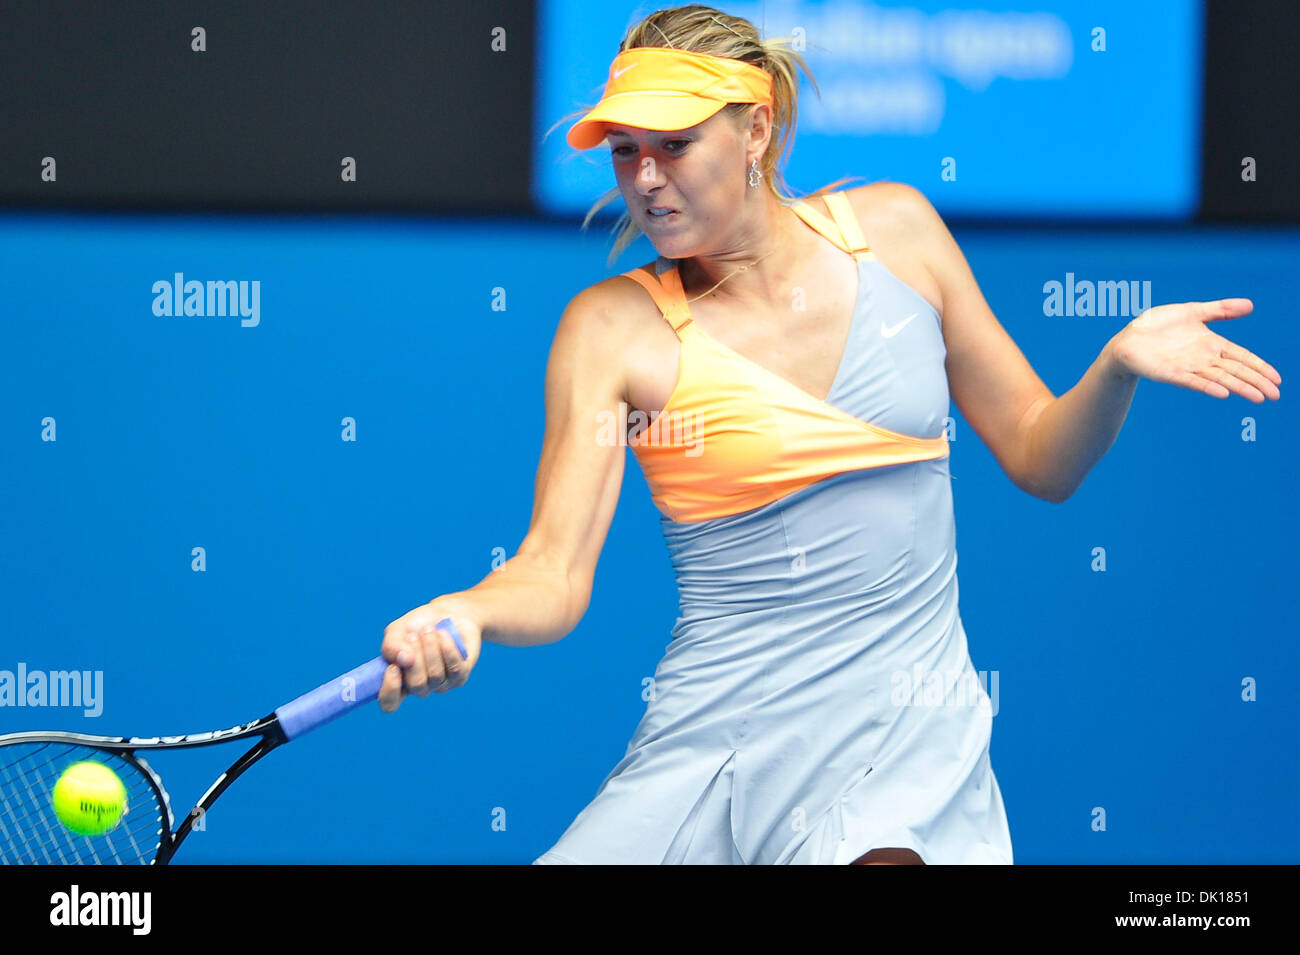 Jan. 17, 2011 - Melbourne, Victoria, Australia - Maria Sharapova (RUS) in action during her first round match against Tamarine Tanasugarn (THA) on day one of the 2011 Australian Open at Melbourne Park, Australia. (Credit Image: © Sydney Low/Southcreek Global/ZUMAPRESS.com) Stock Photo